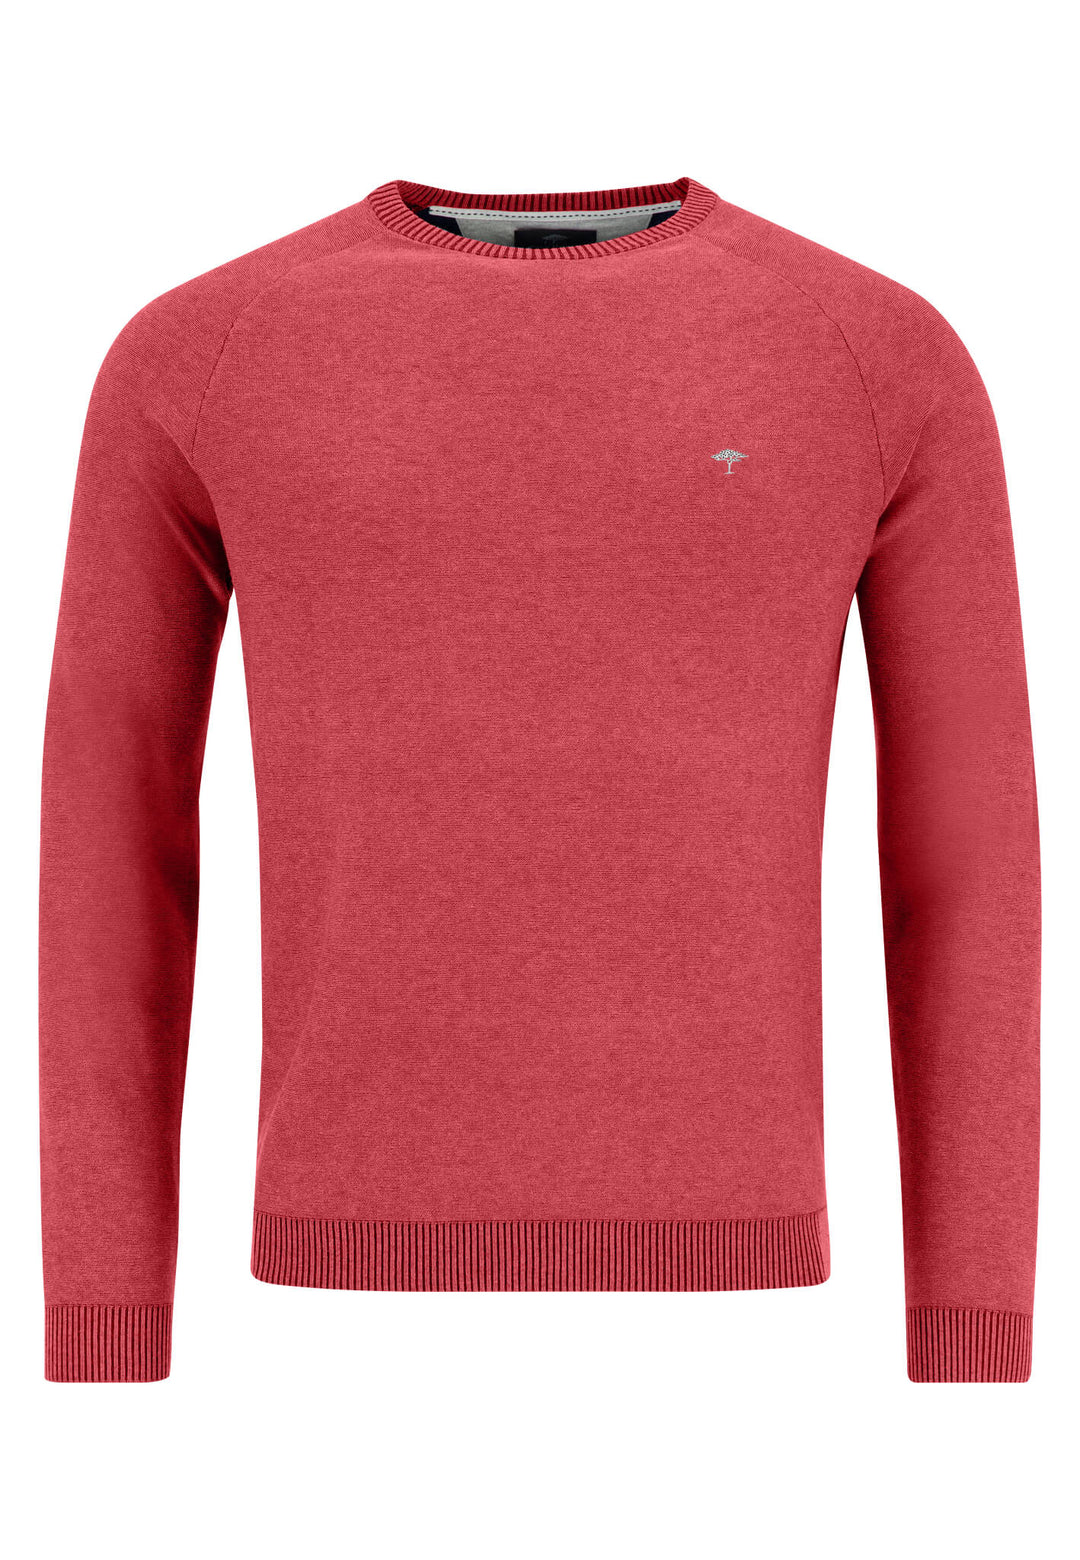 made Outlet – sweater fine of FYNCH-HATTON | FYNCH-HATTON cotton